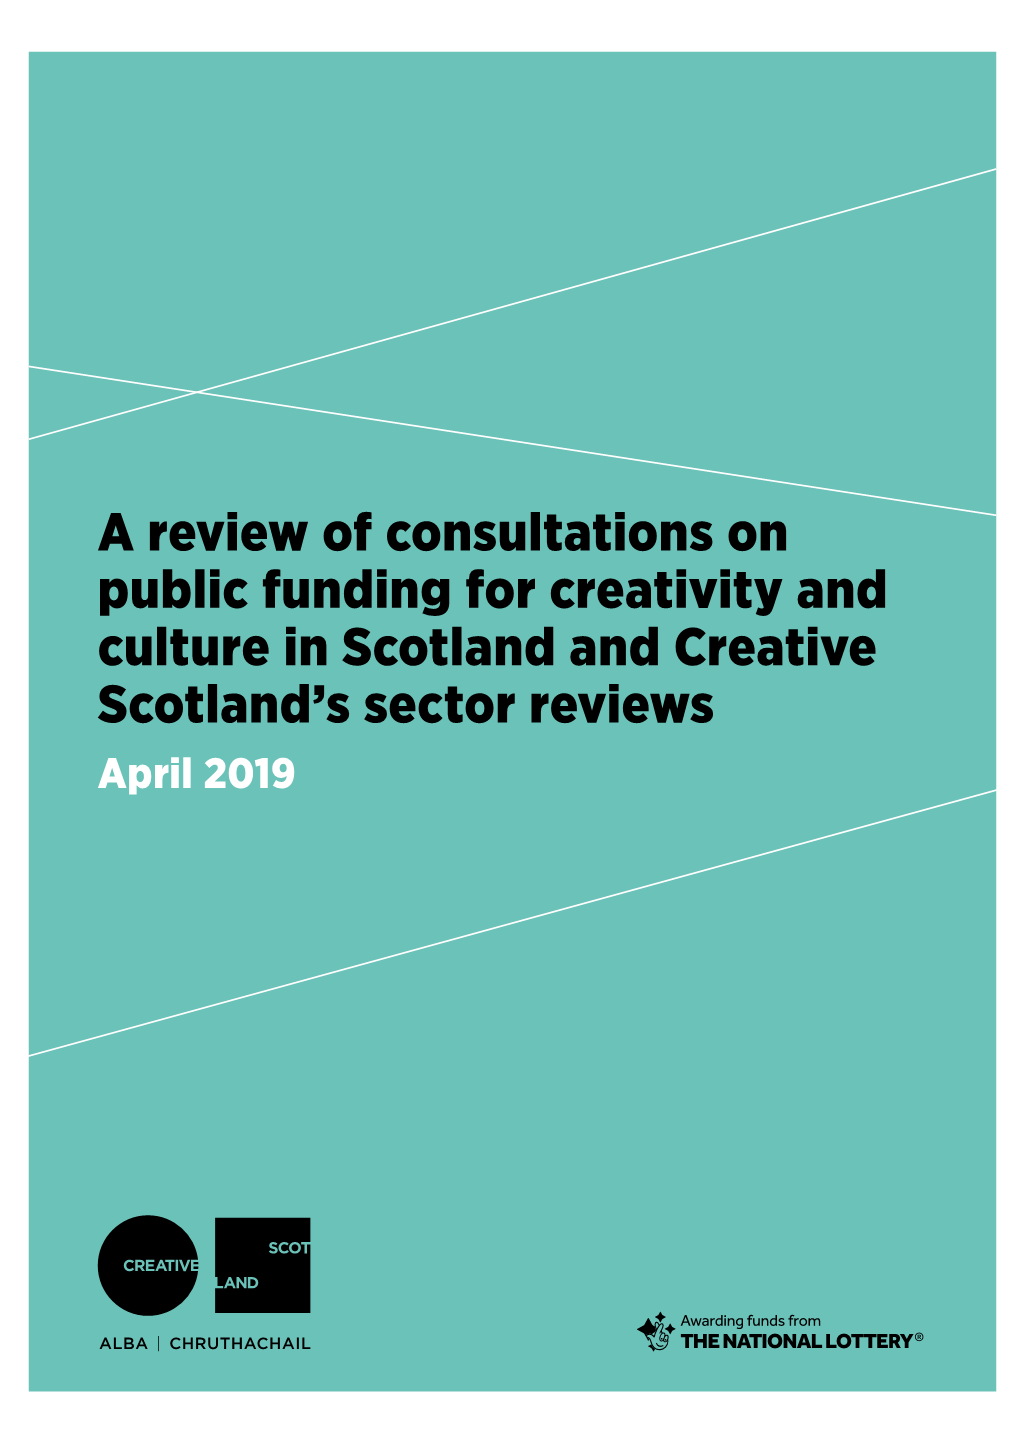 A Review of Consultations on Public Funding for Creativity and Culture in Scotland and Creative Scotland's Sector Reviews